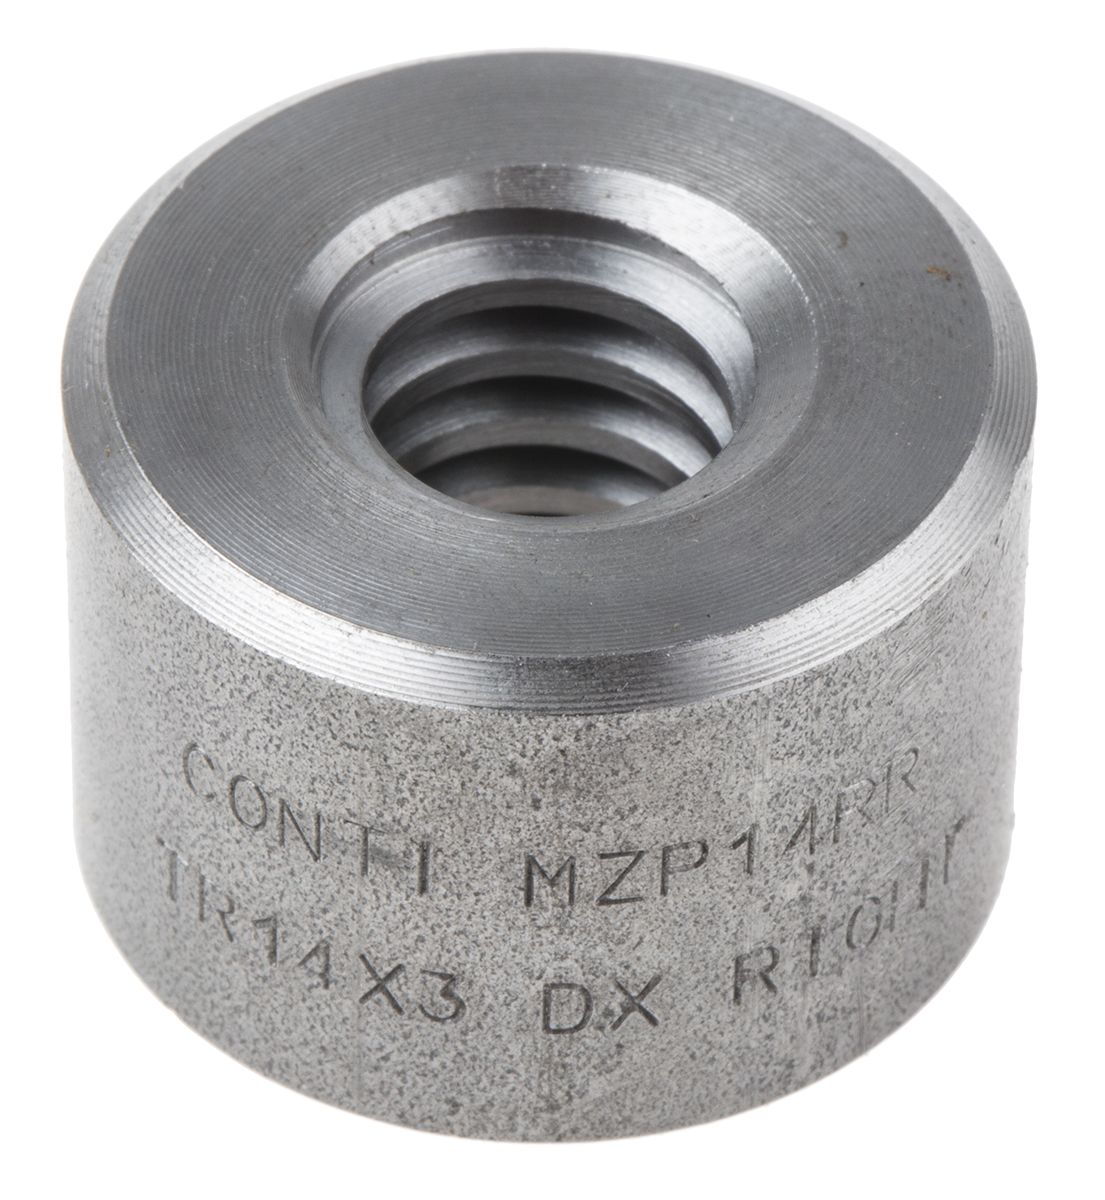 RS PRO Cylindrical Nut For Lead Screw, Dia. 14mm